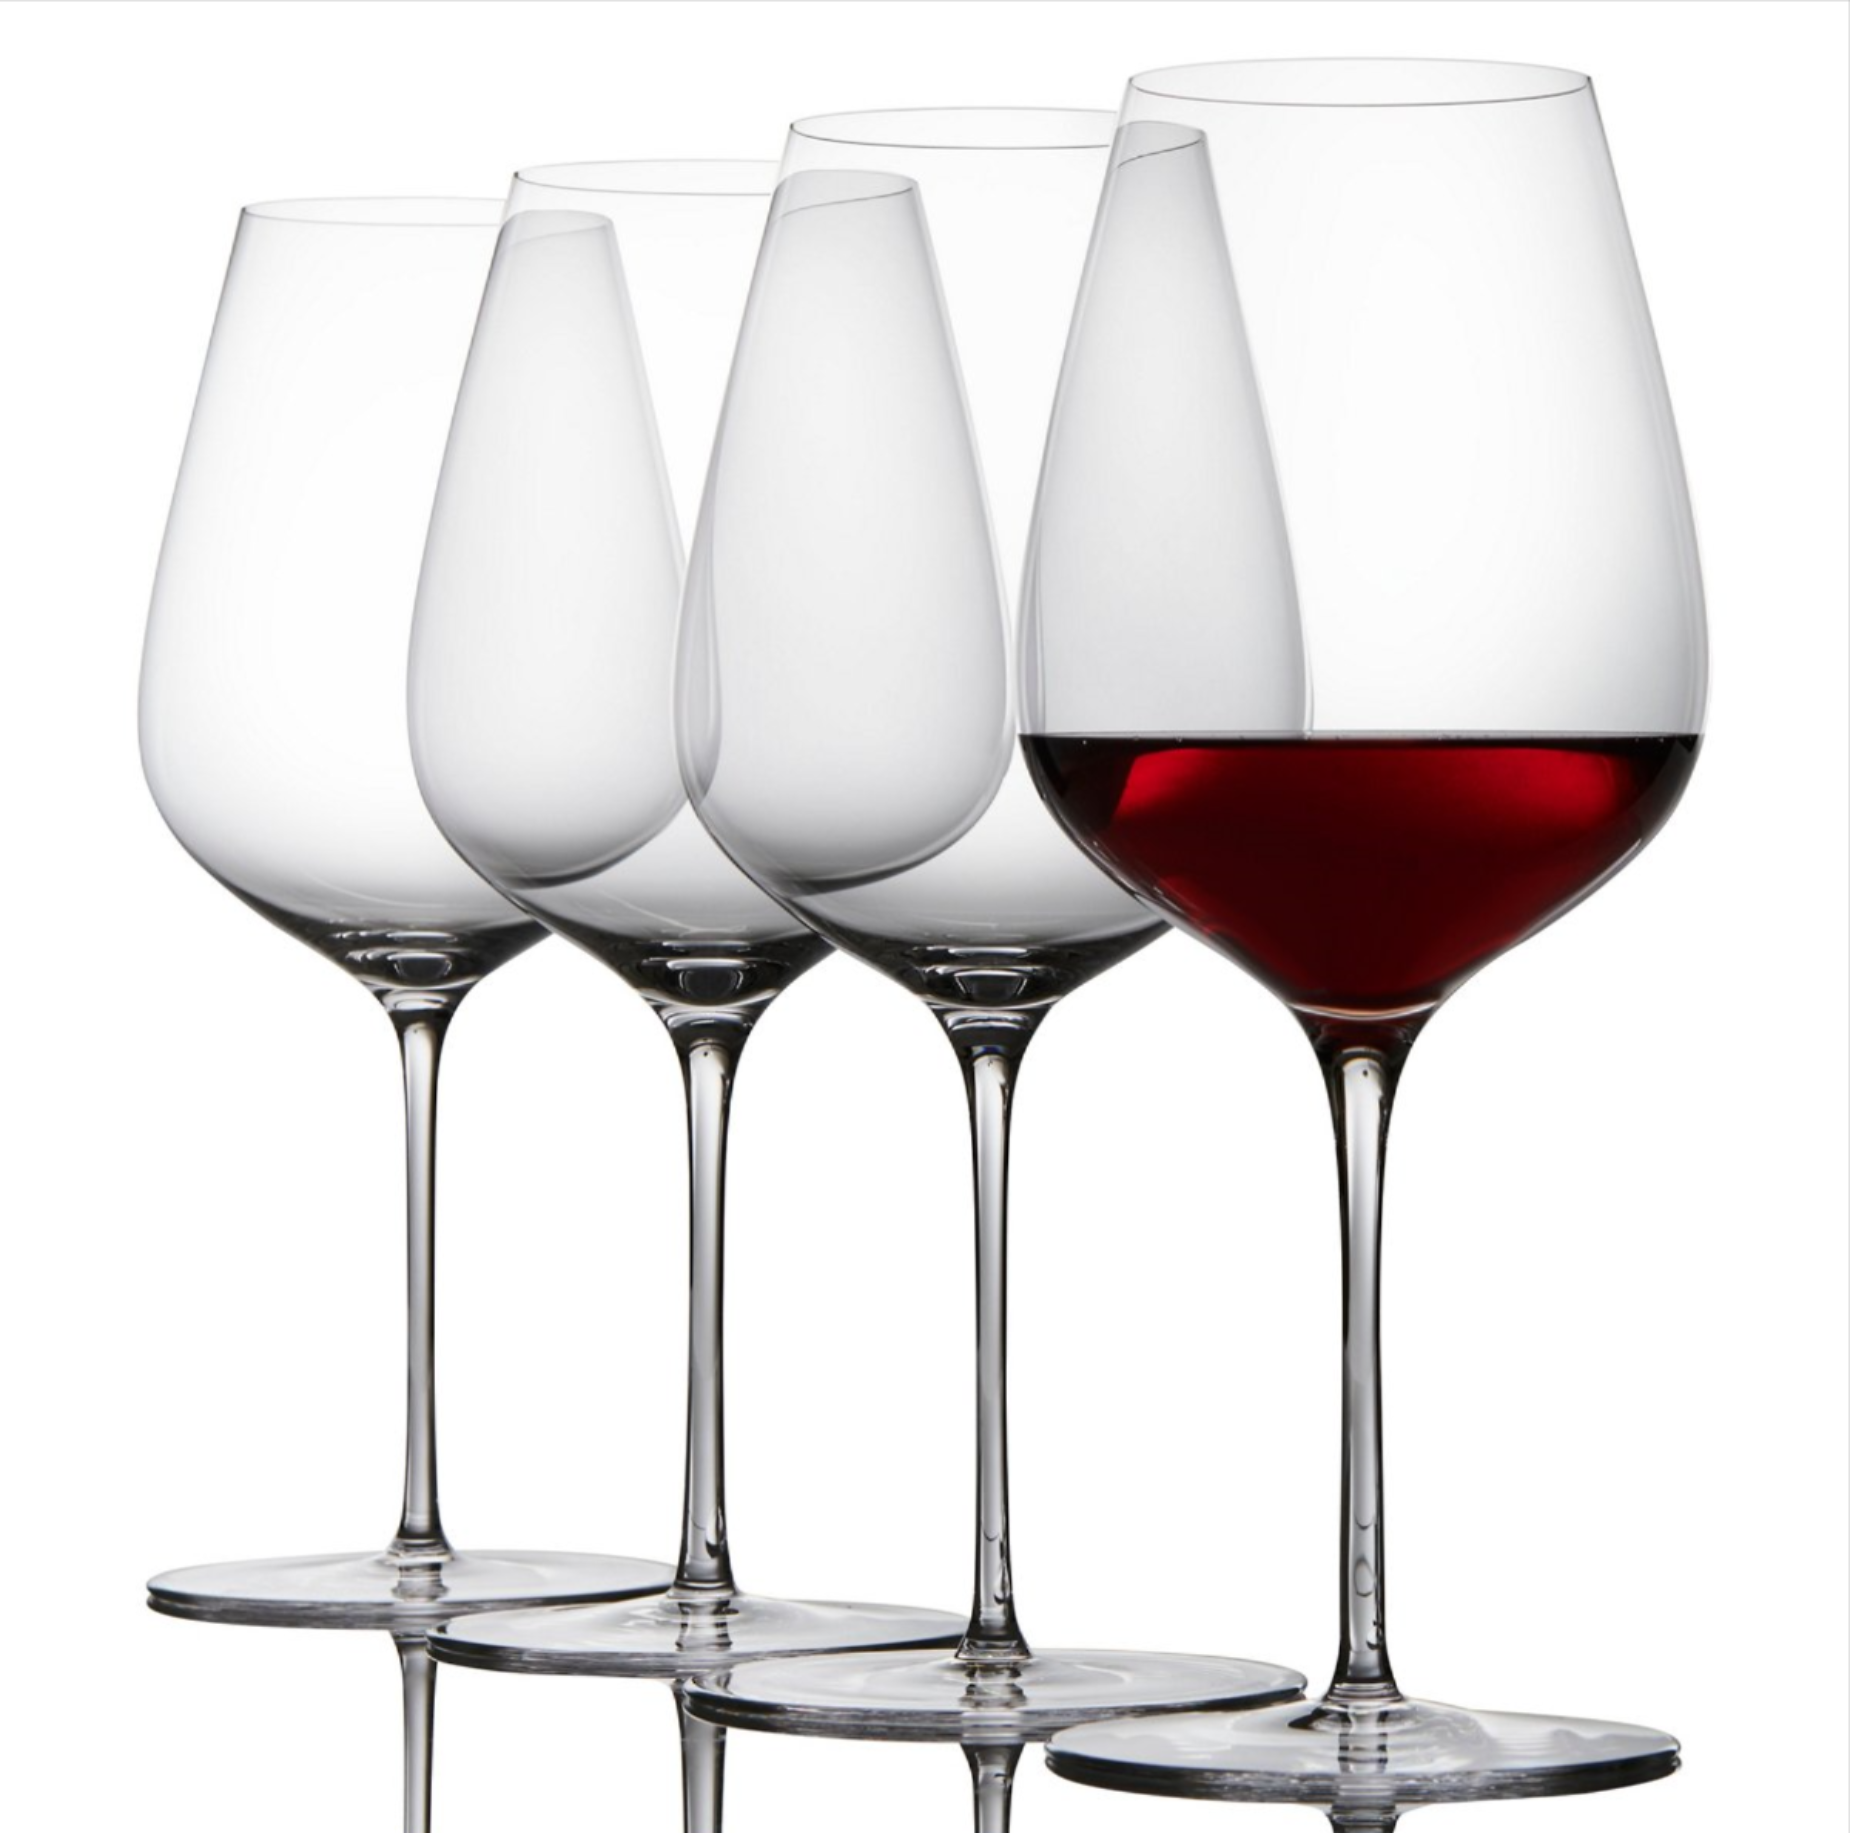 https://mignanelliwinery.com/cdn/shop/products/Mignanelli-family-wines-shop-wine-accessories-bordeaux-wine-glasses-four-pack-gifts-best-buy_1850x.png?v=1567555829